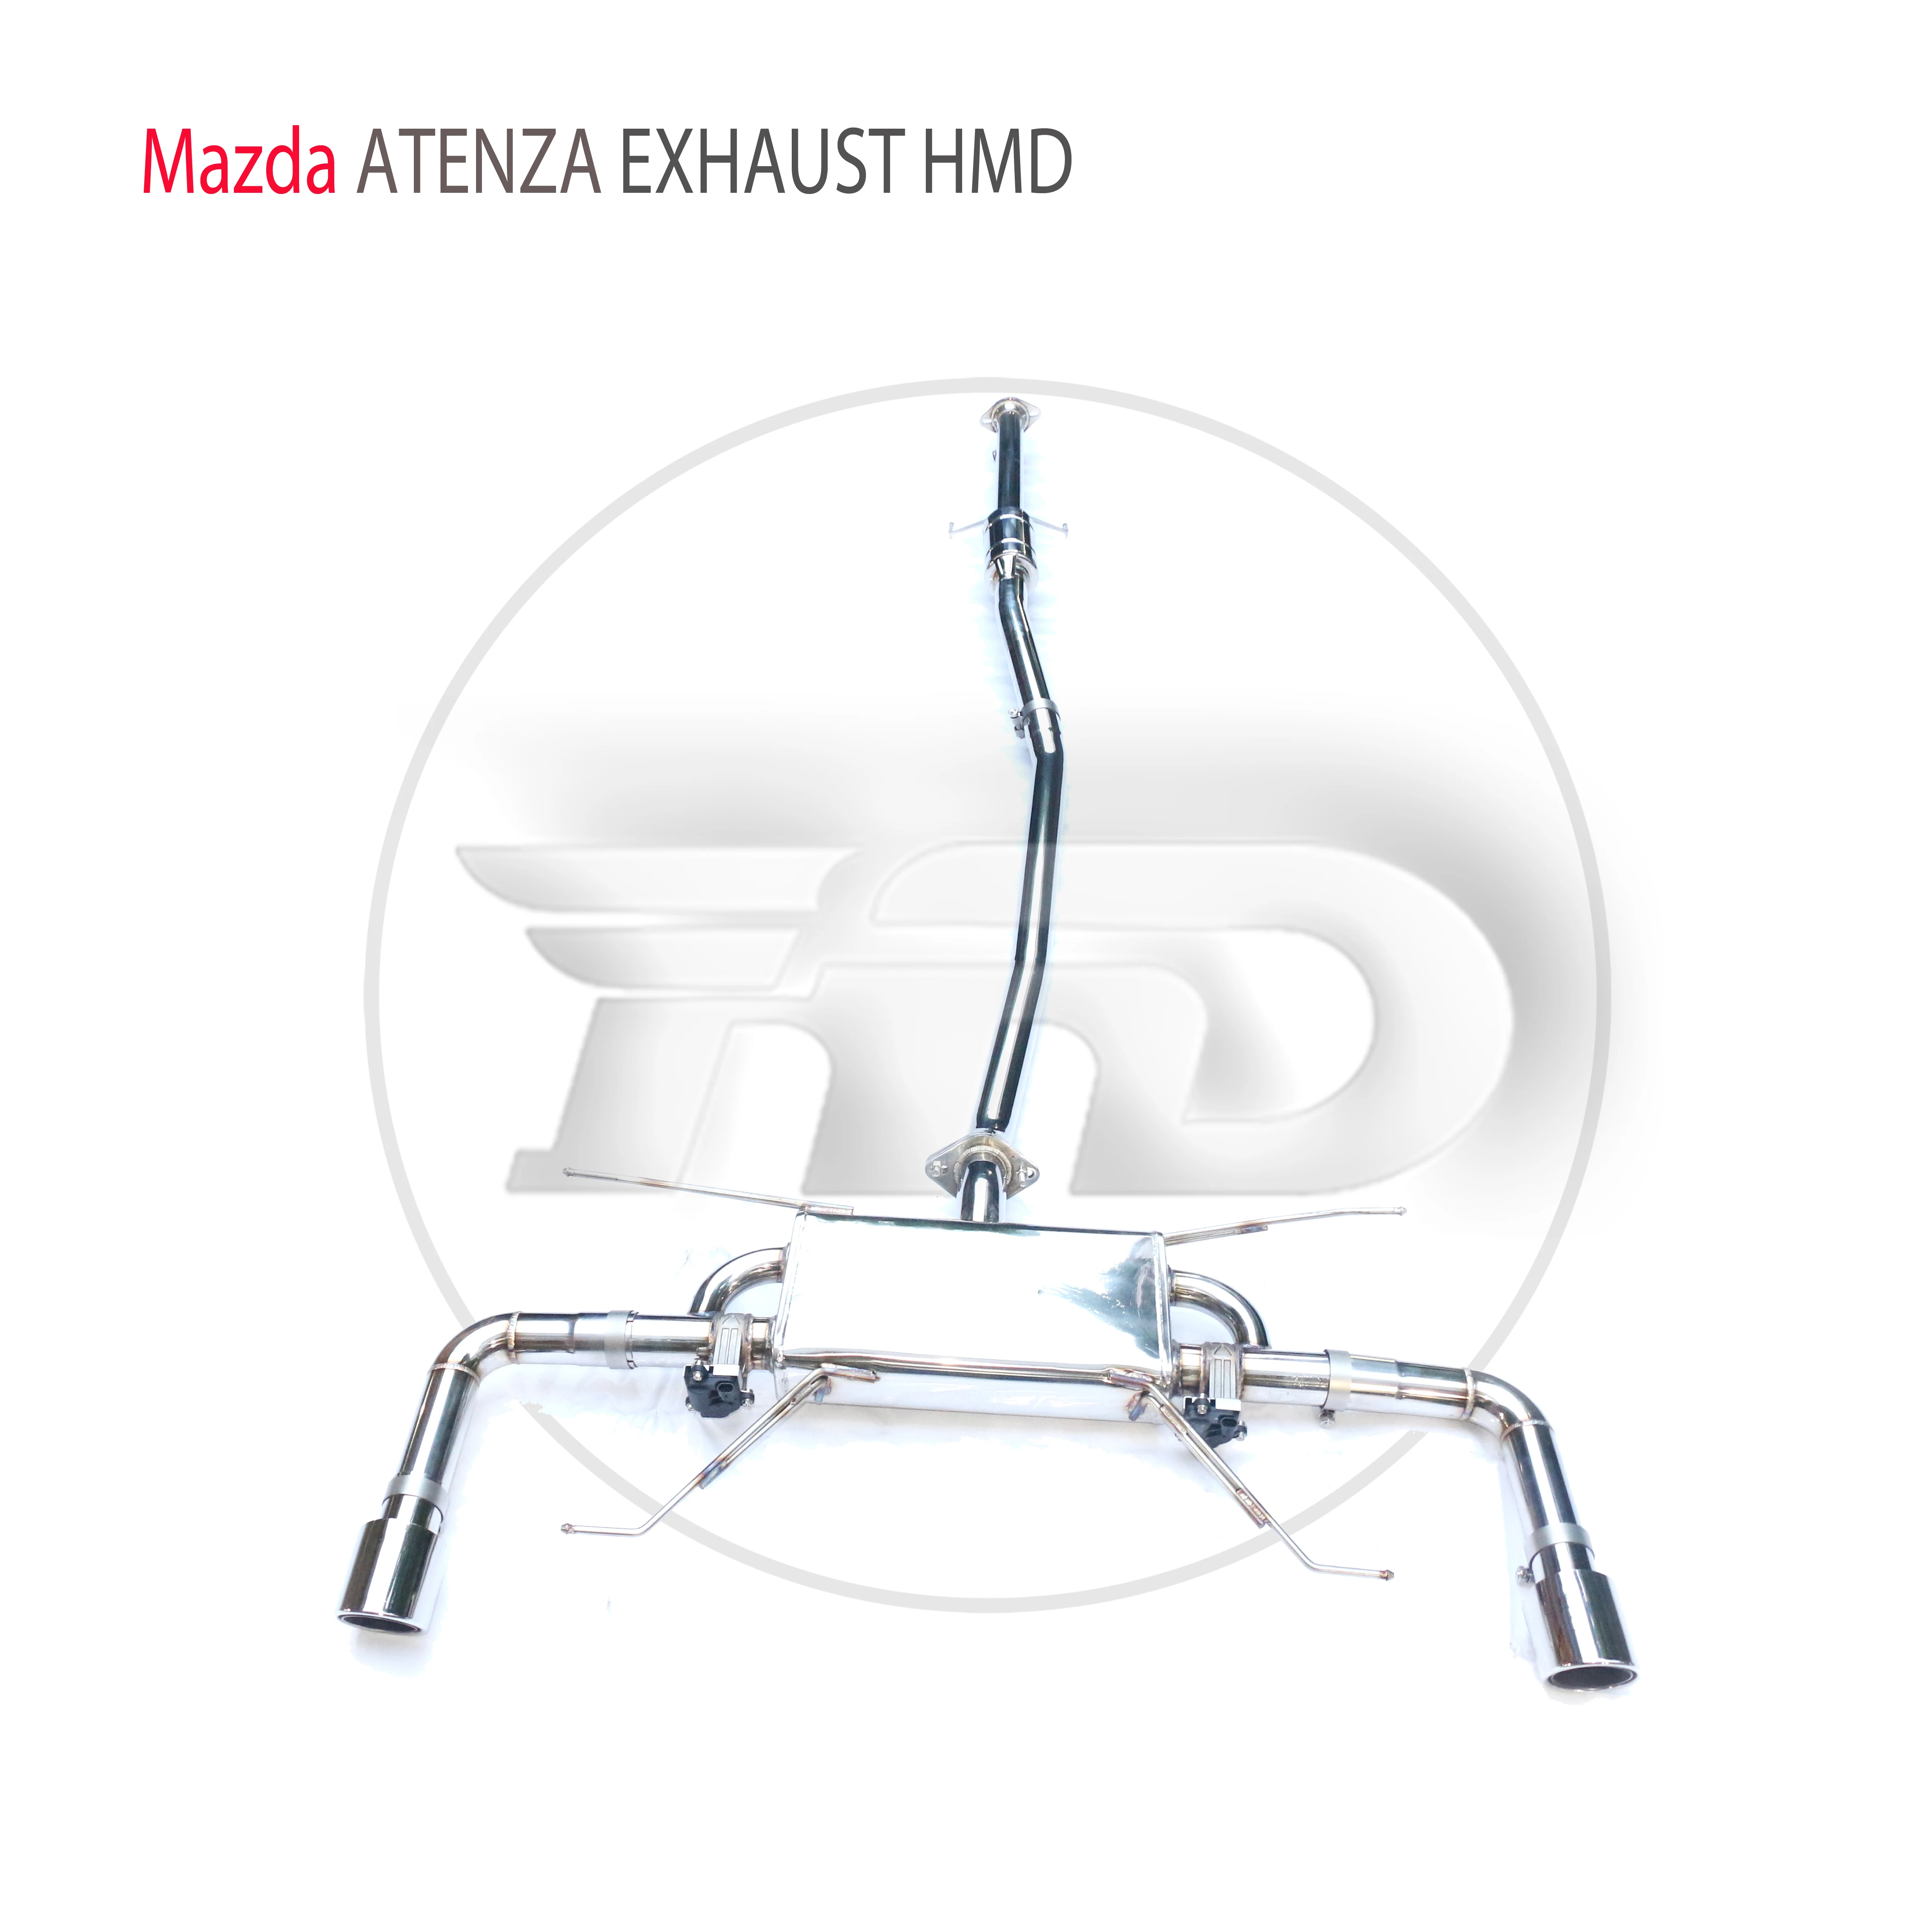 

HMD Stainless Steel Exhaust System Performance Catback is Suitable for Mazda 6 ATENZA Car Valve Muffler